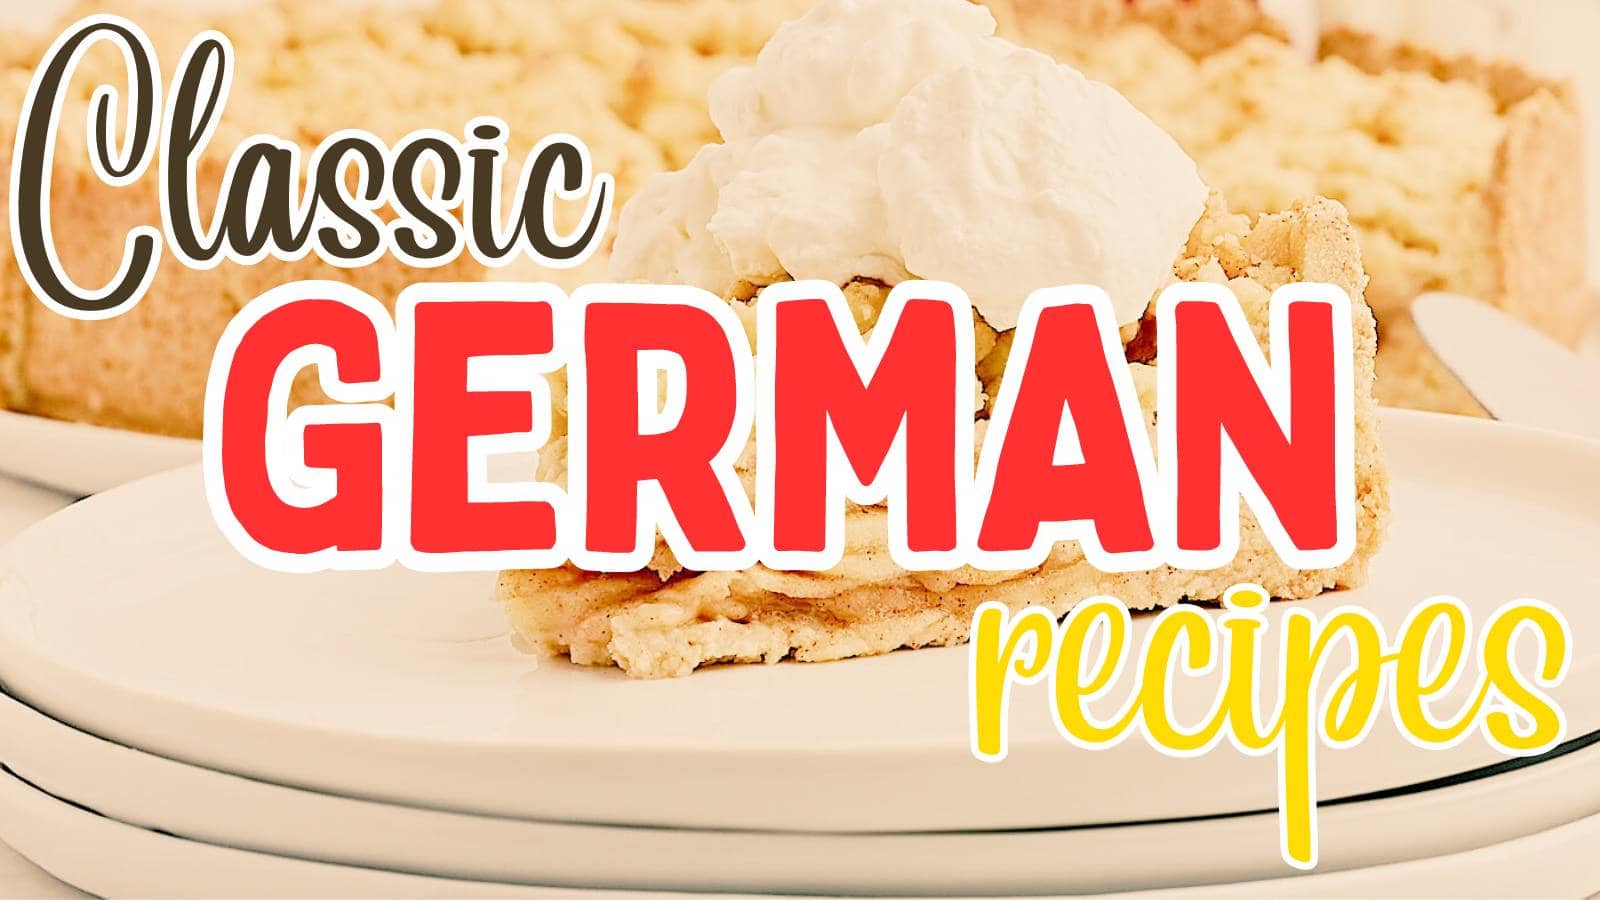 Collection of German Recipes by Cheerful Cook (Maike Corbett).